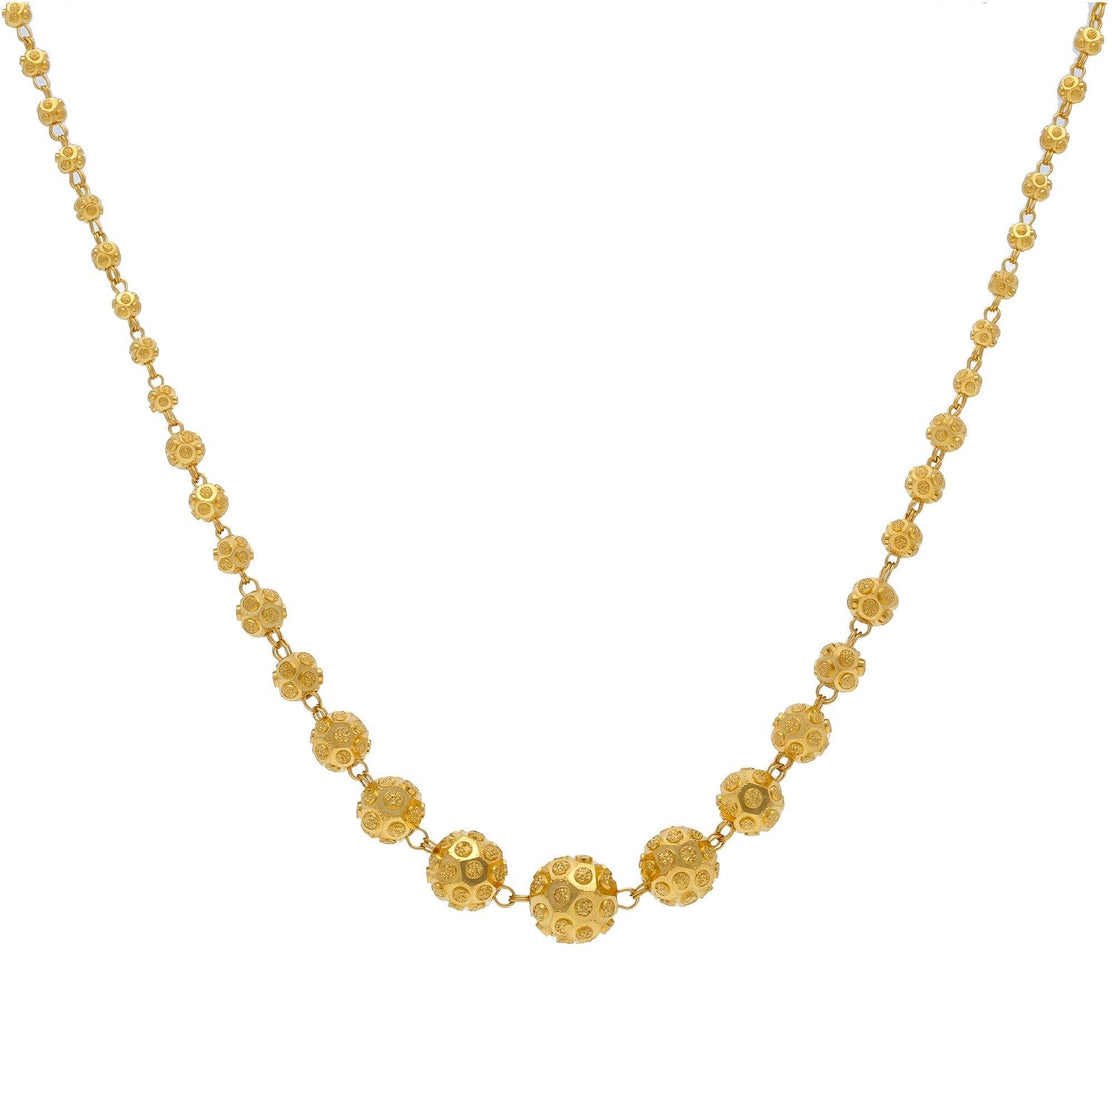 22K Gold Necklace For Women with Cz - 235-GN3326 in 7.250 Grams